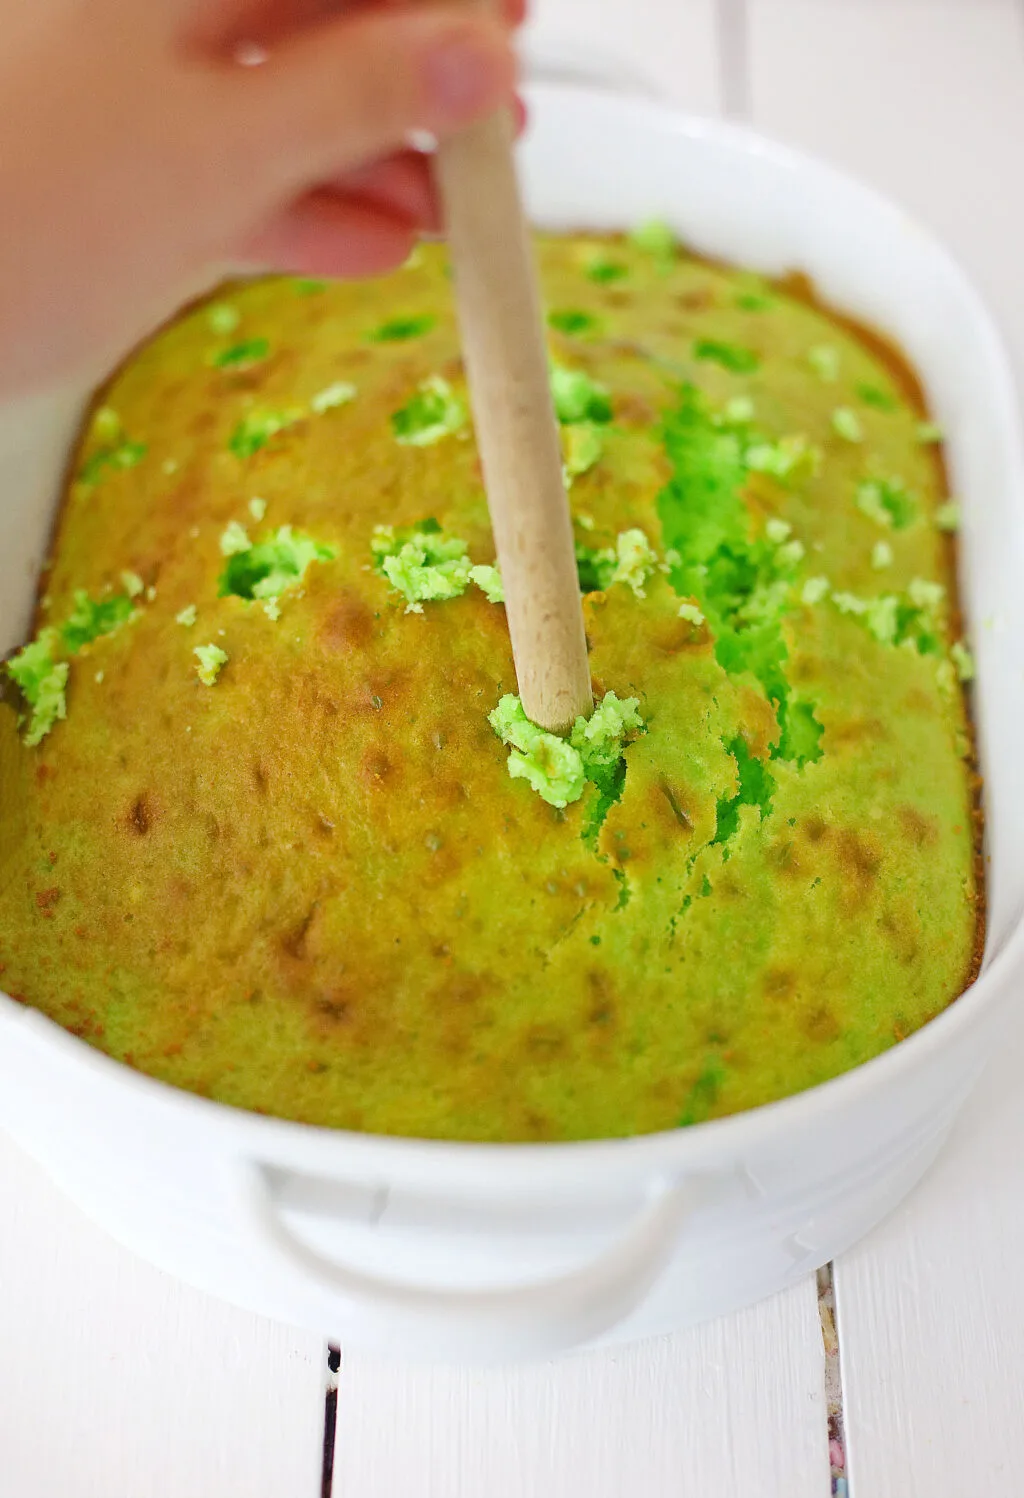 using wooden spoon to poke holes in green cake